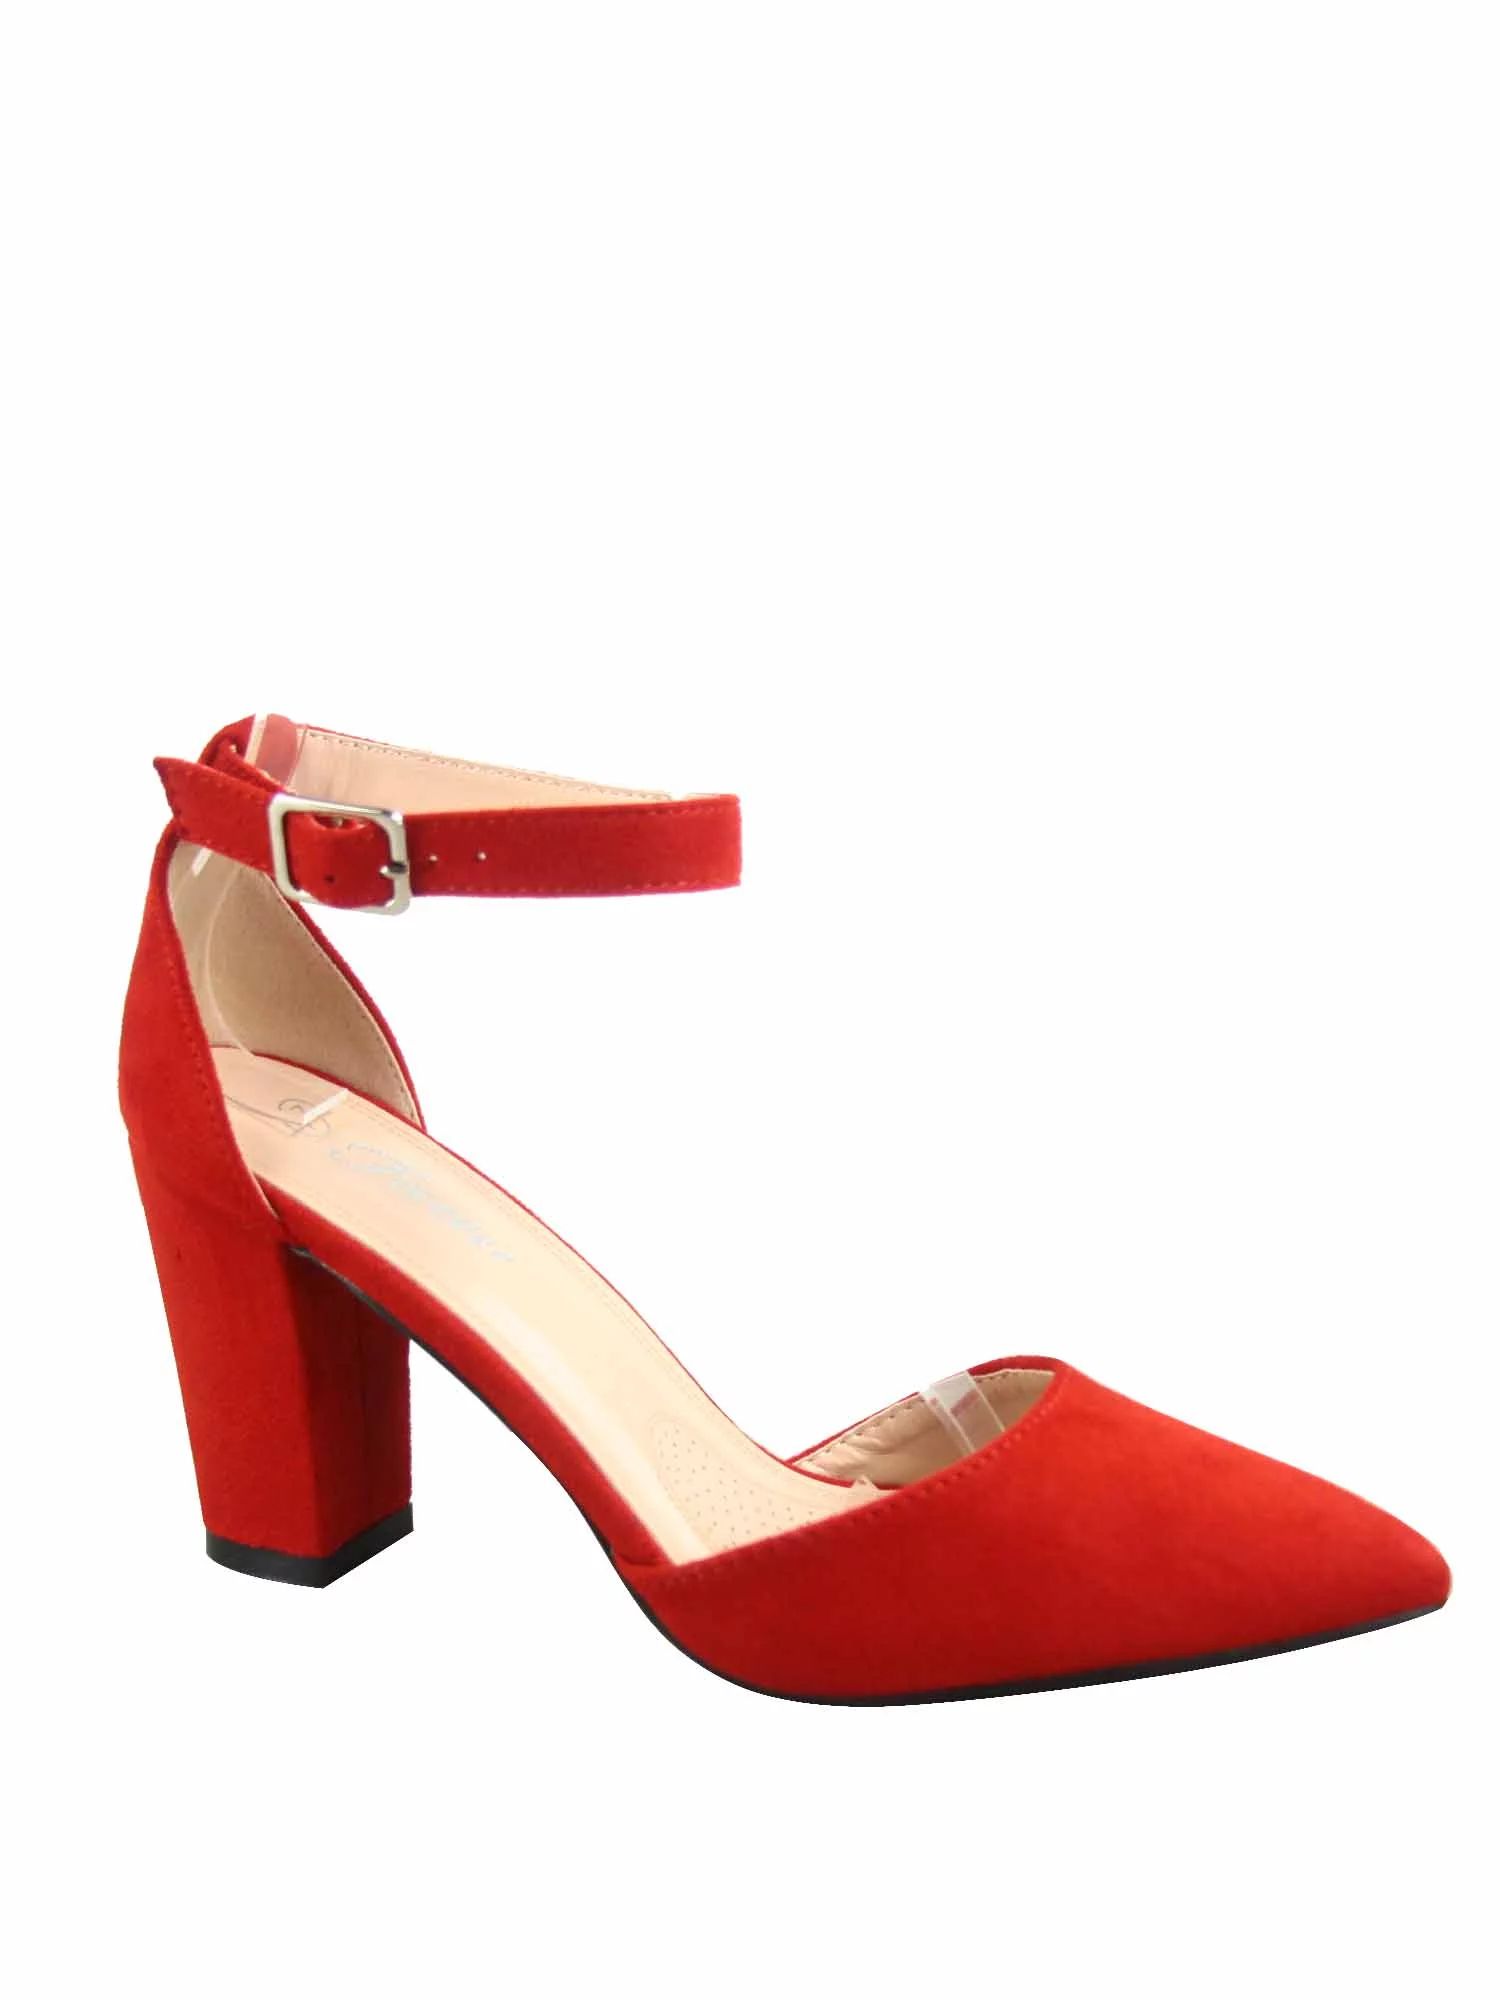 Songful-6 Women's Pointed Toe Ankle Strap Buckle Chunky High Heels Sandals Shoes ( Red Sv, 8 ) - ... | Walmart (US)